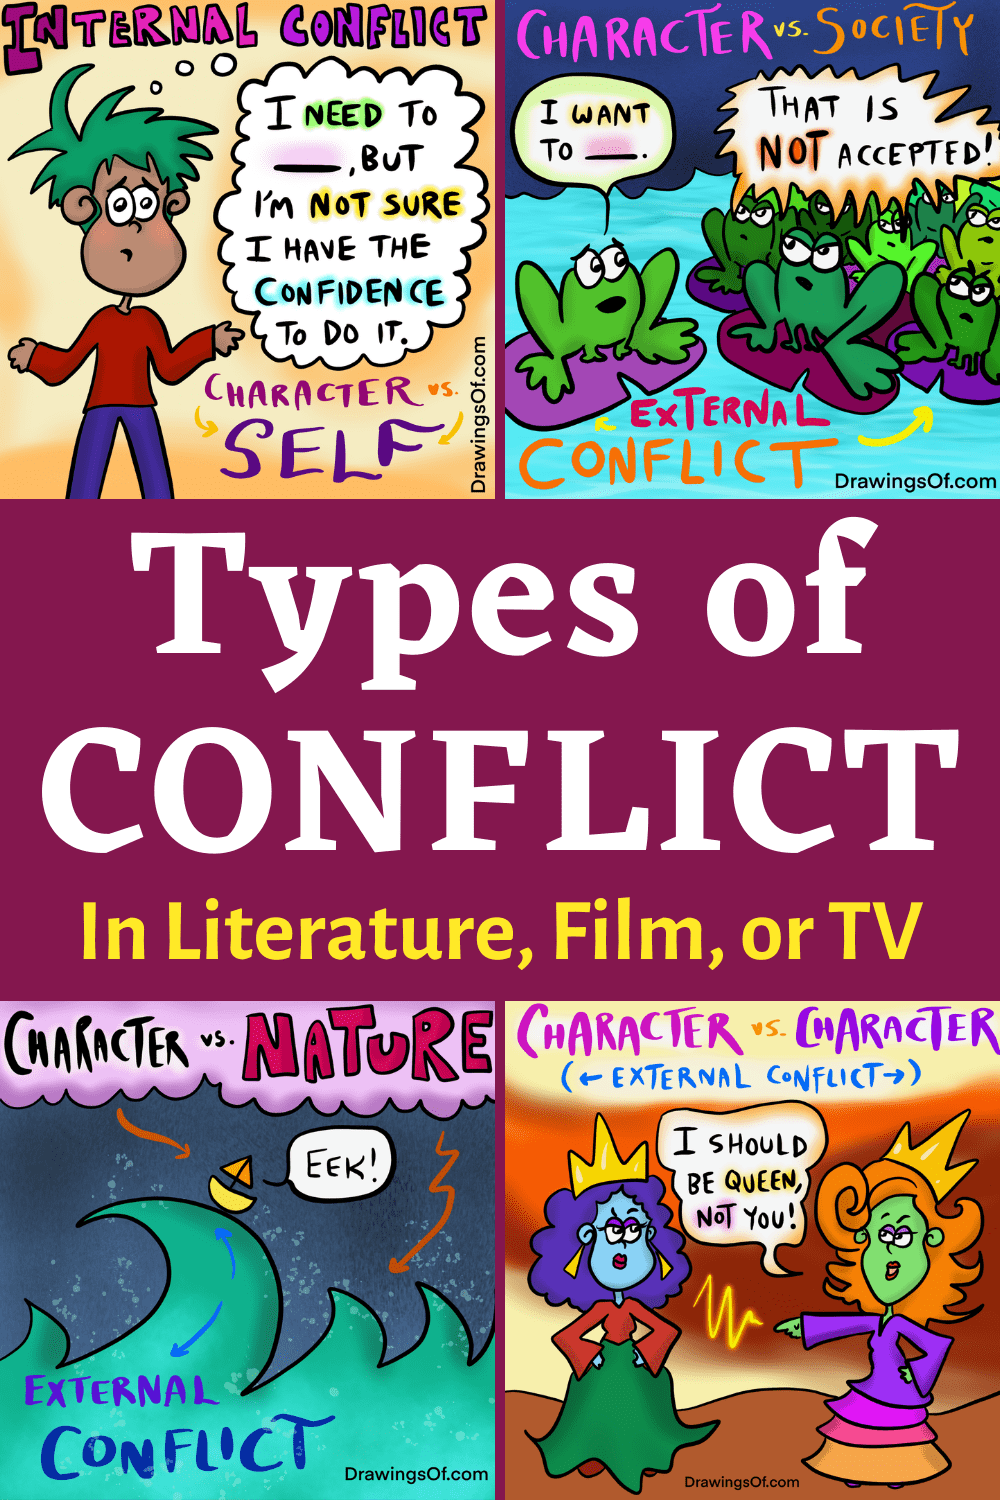 Types of Conflict: External and Internal